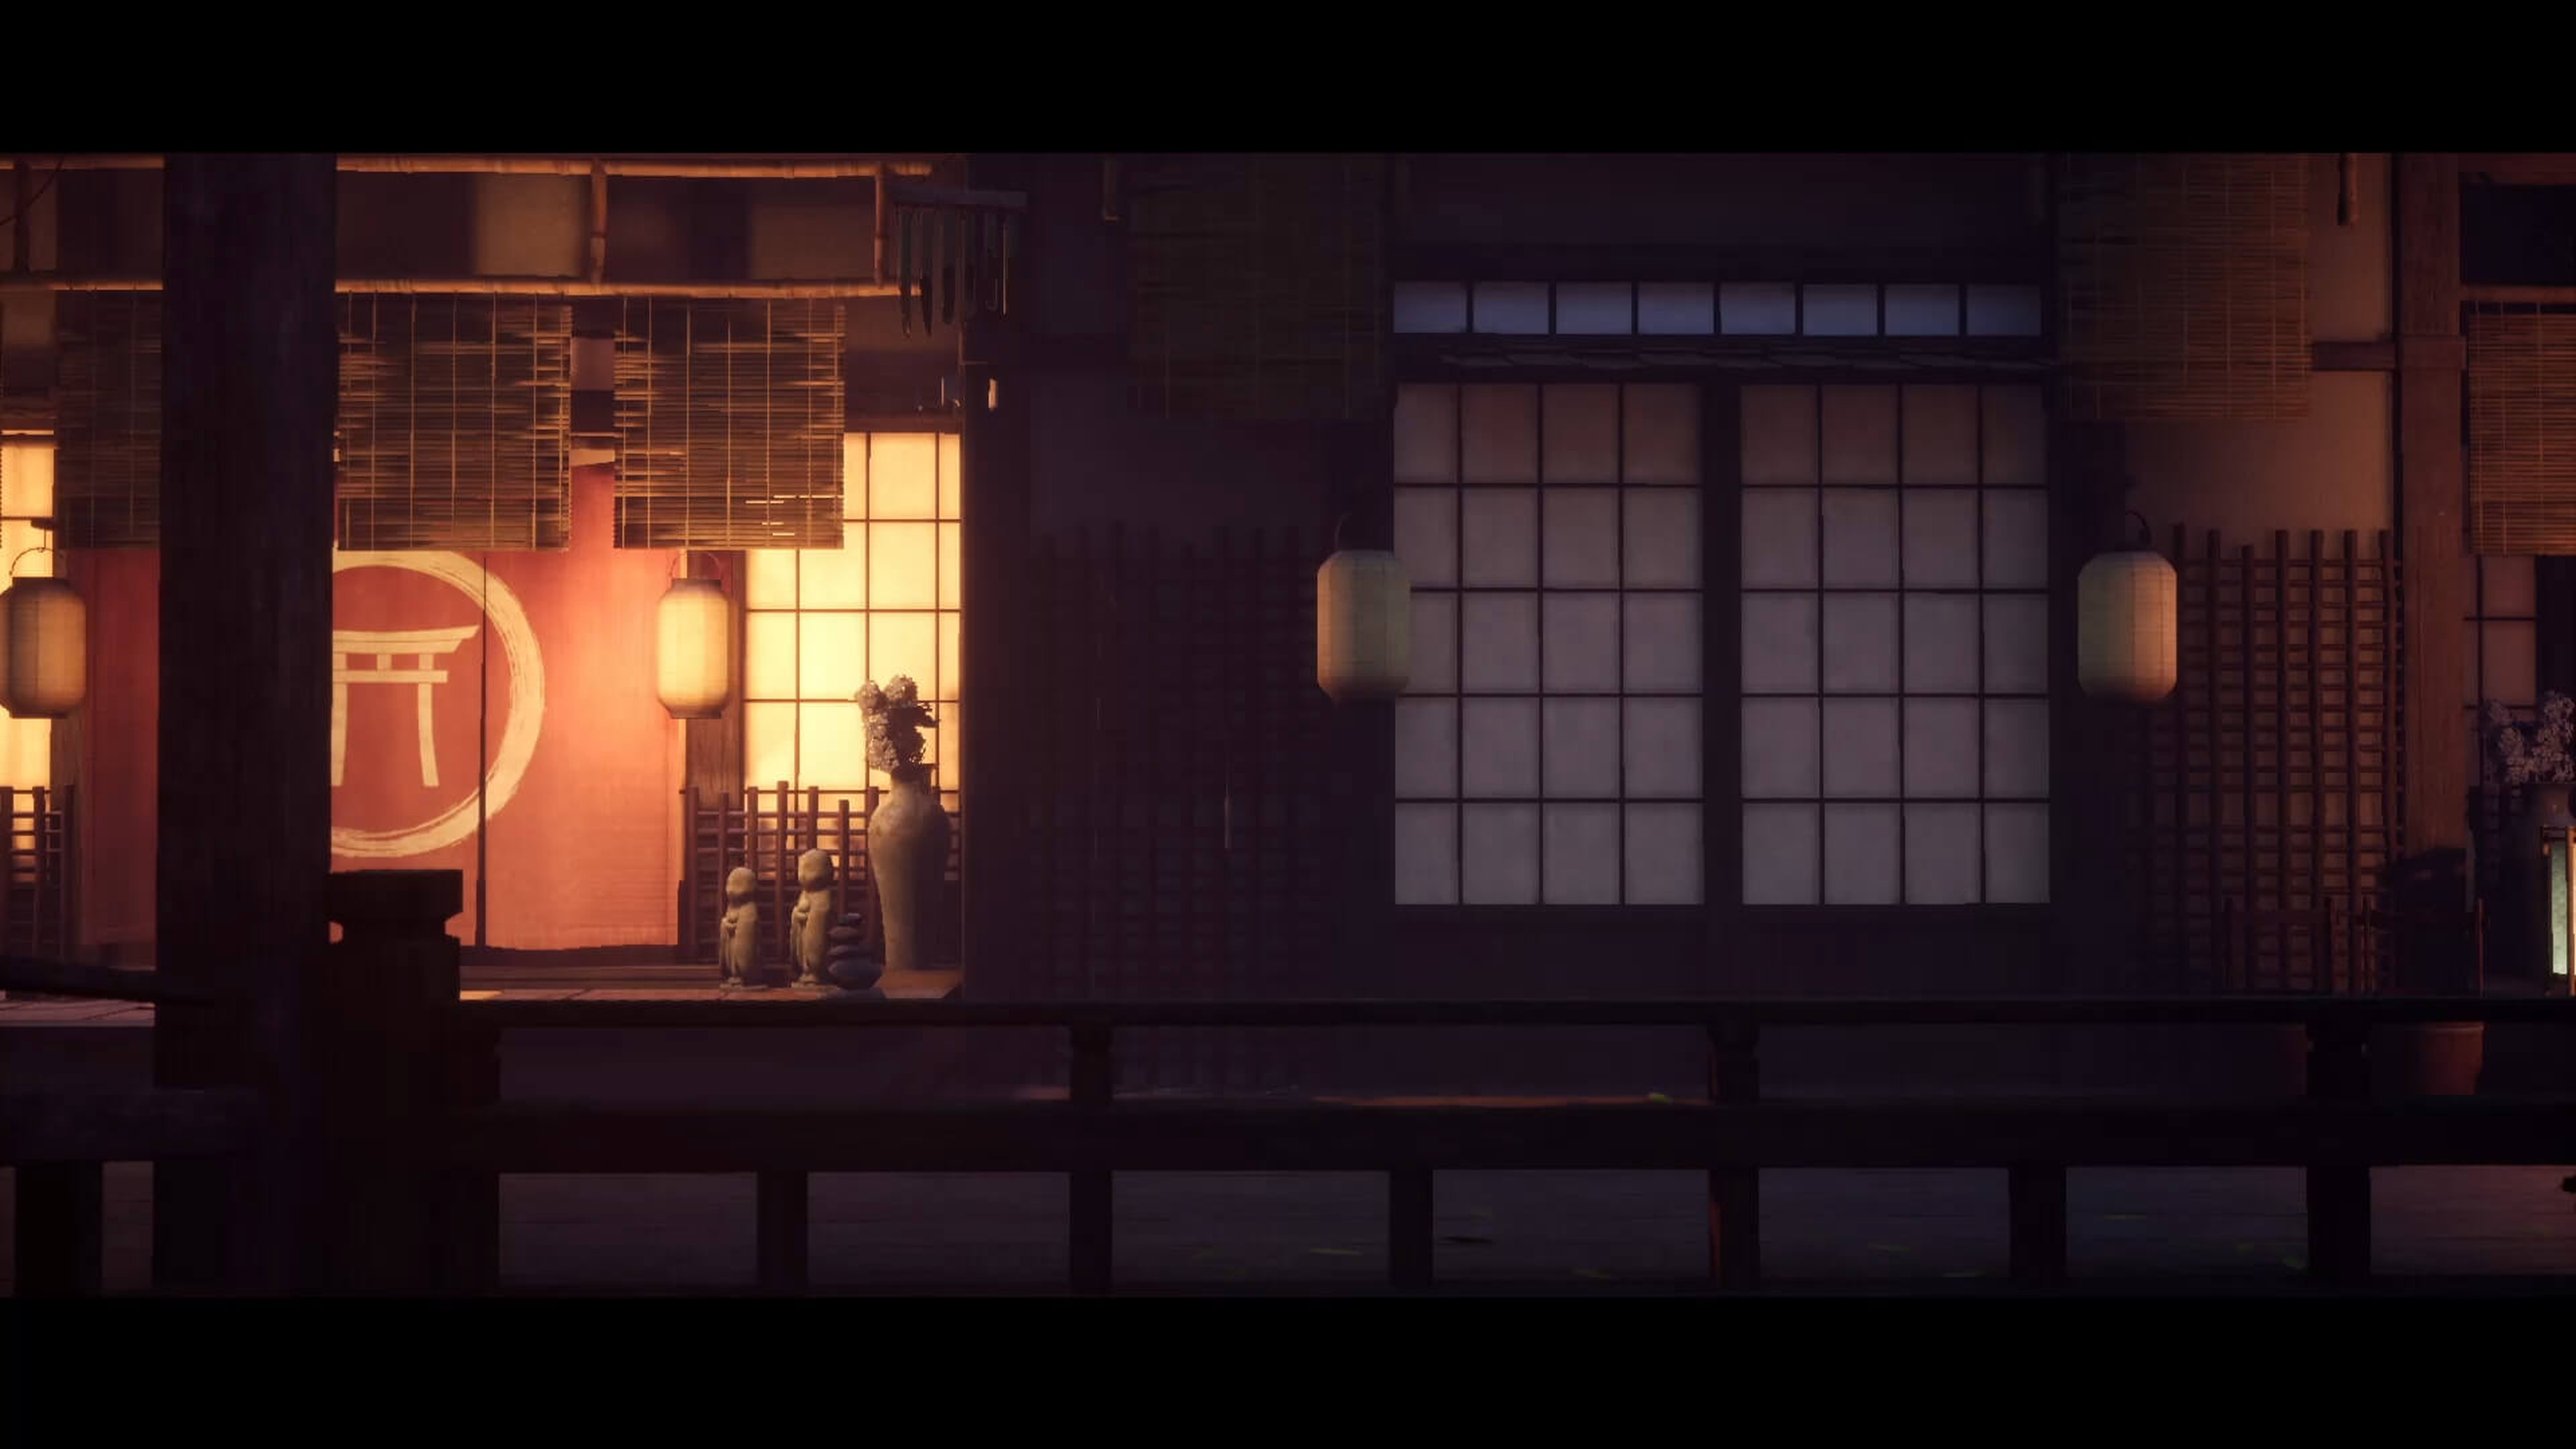 An animated tour around a set of ancient Japanese buildings